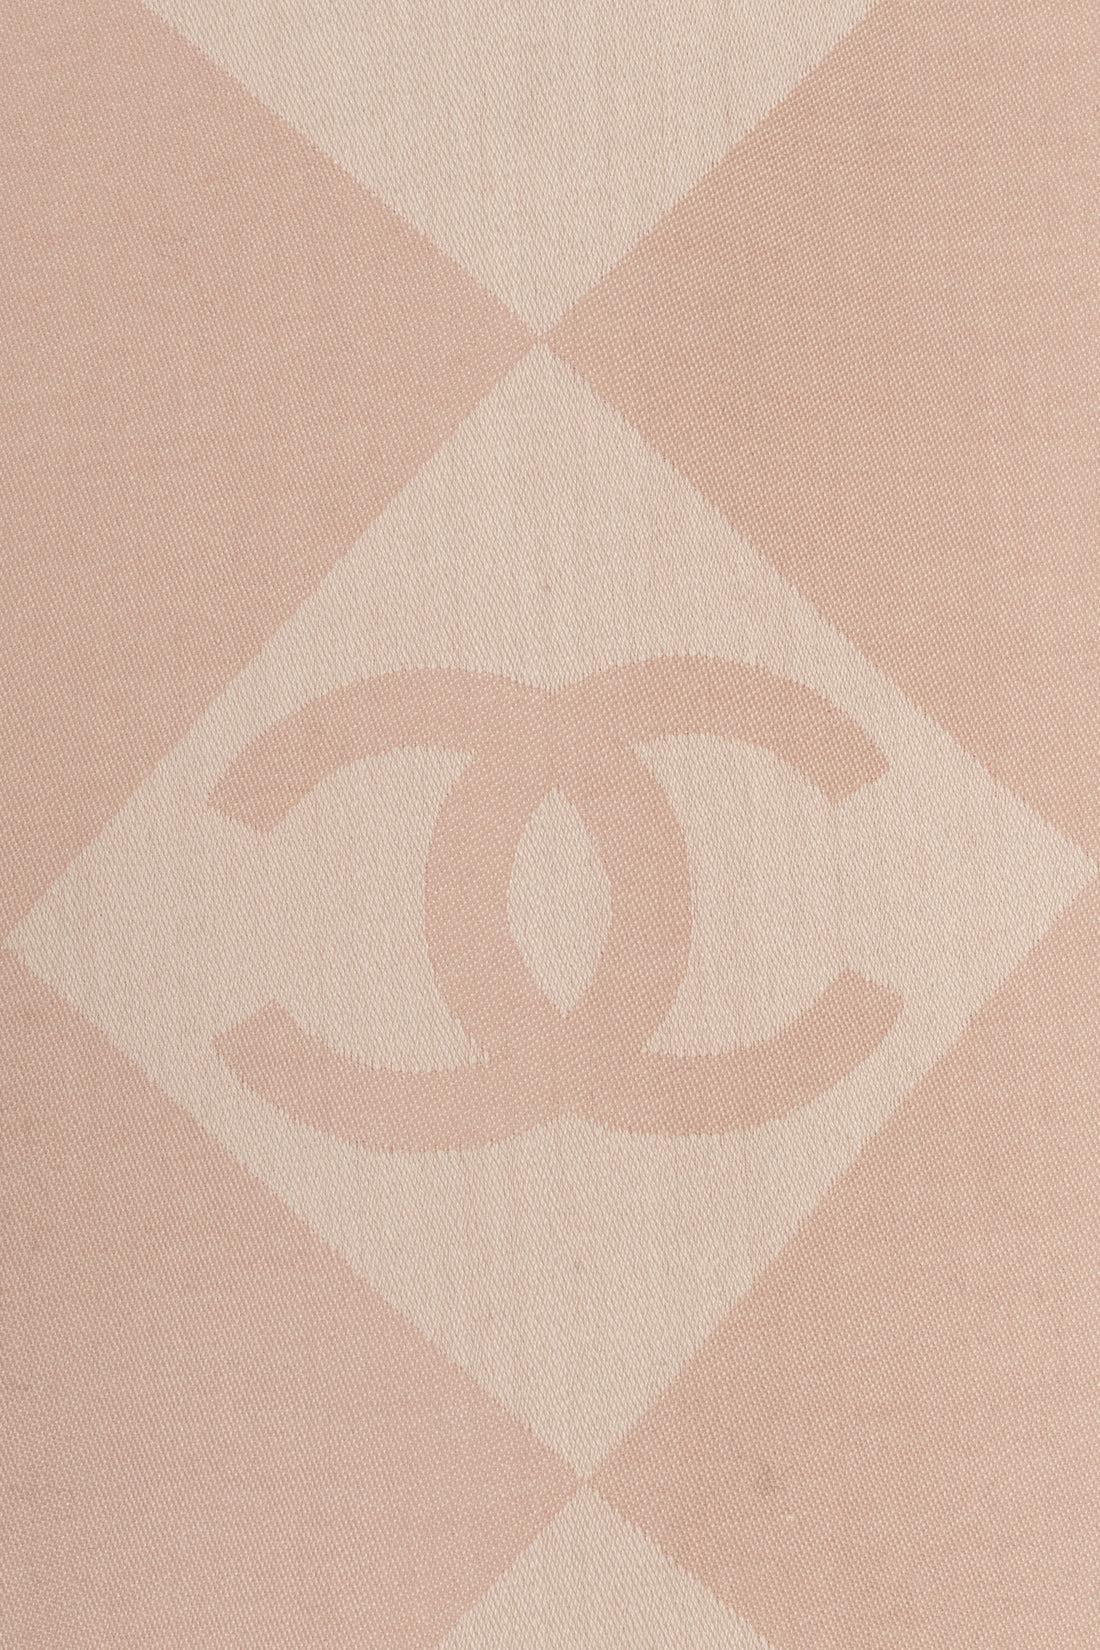 Chanel Cashmere Stole in Pink Tones For Sale 1